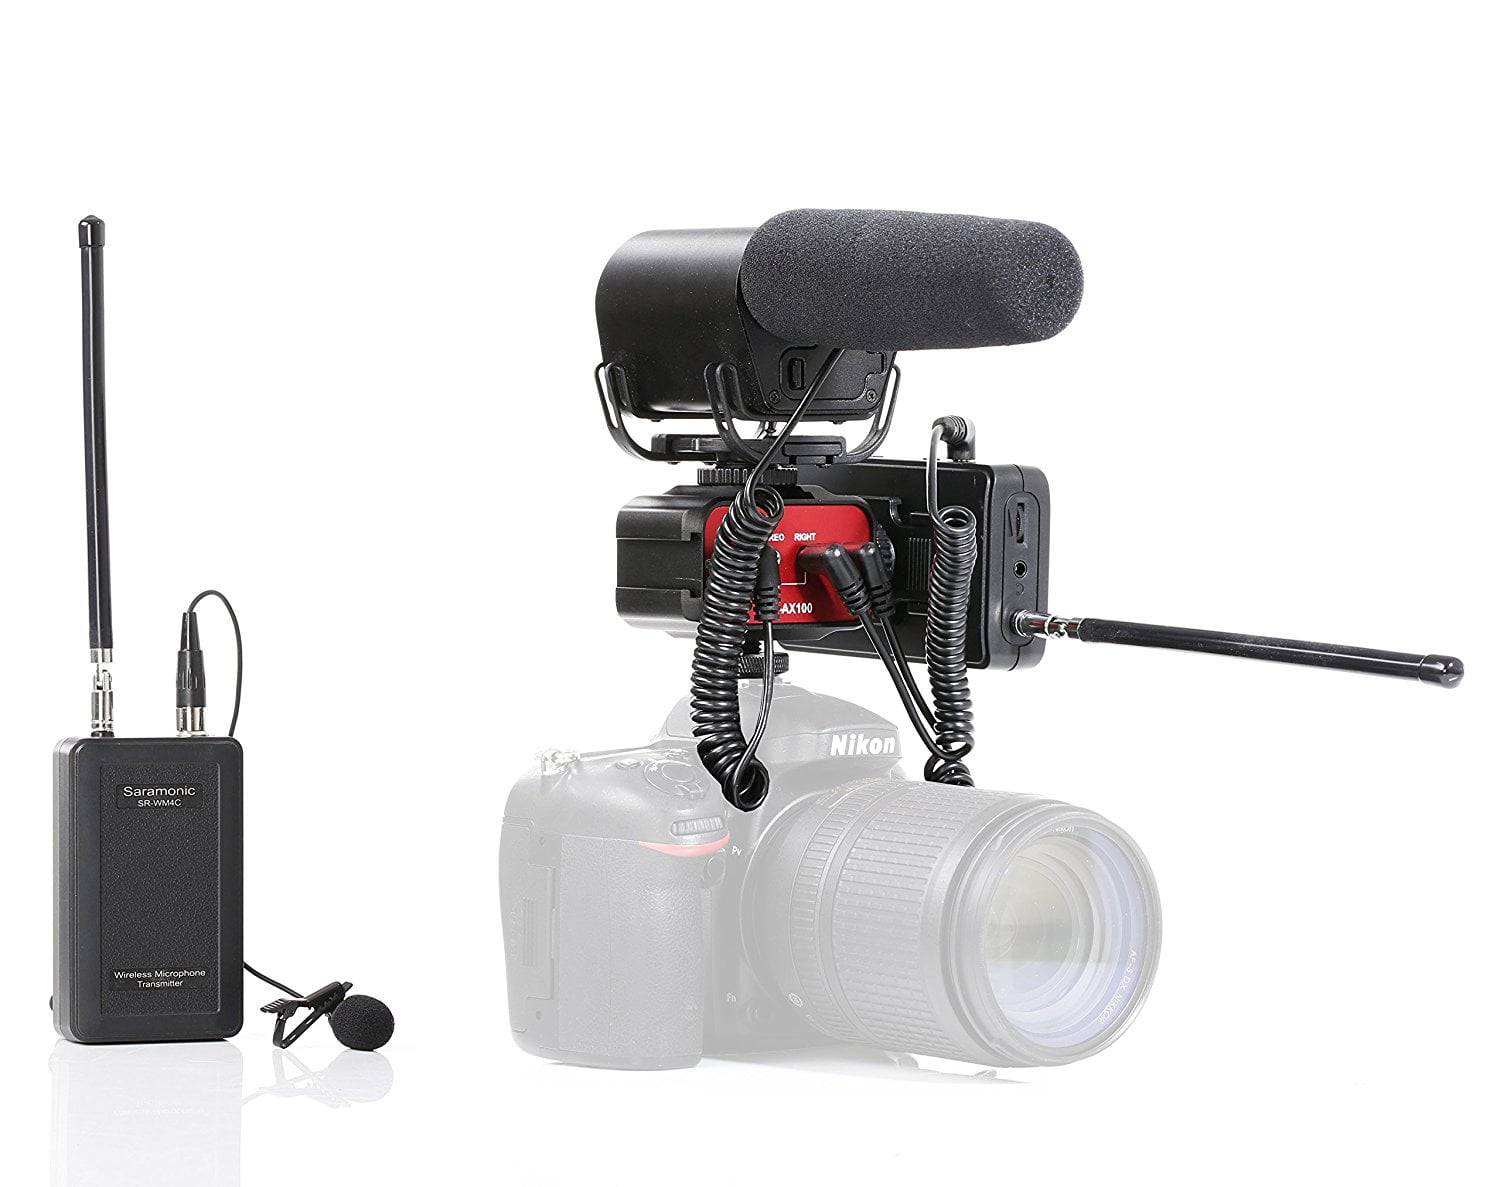 2 Receivers and Audio Mixer for DSLR Cameras Saramonic Dual Wireless VHF Lavalier Microphone Bundle with 2 Transmitters 